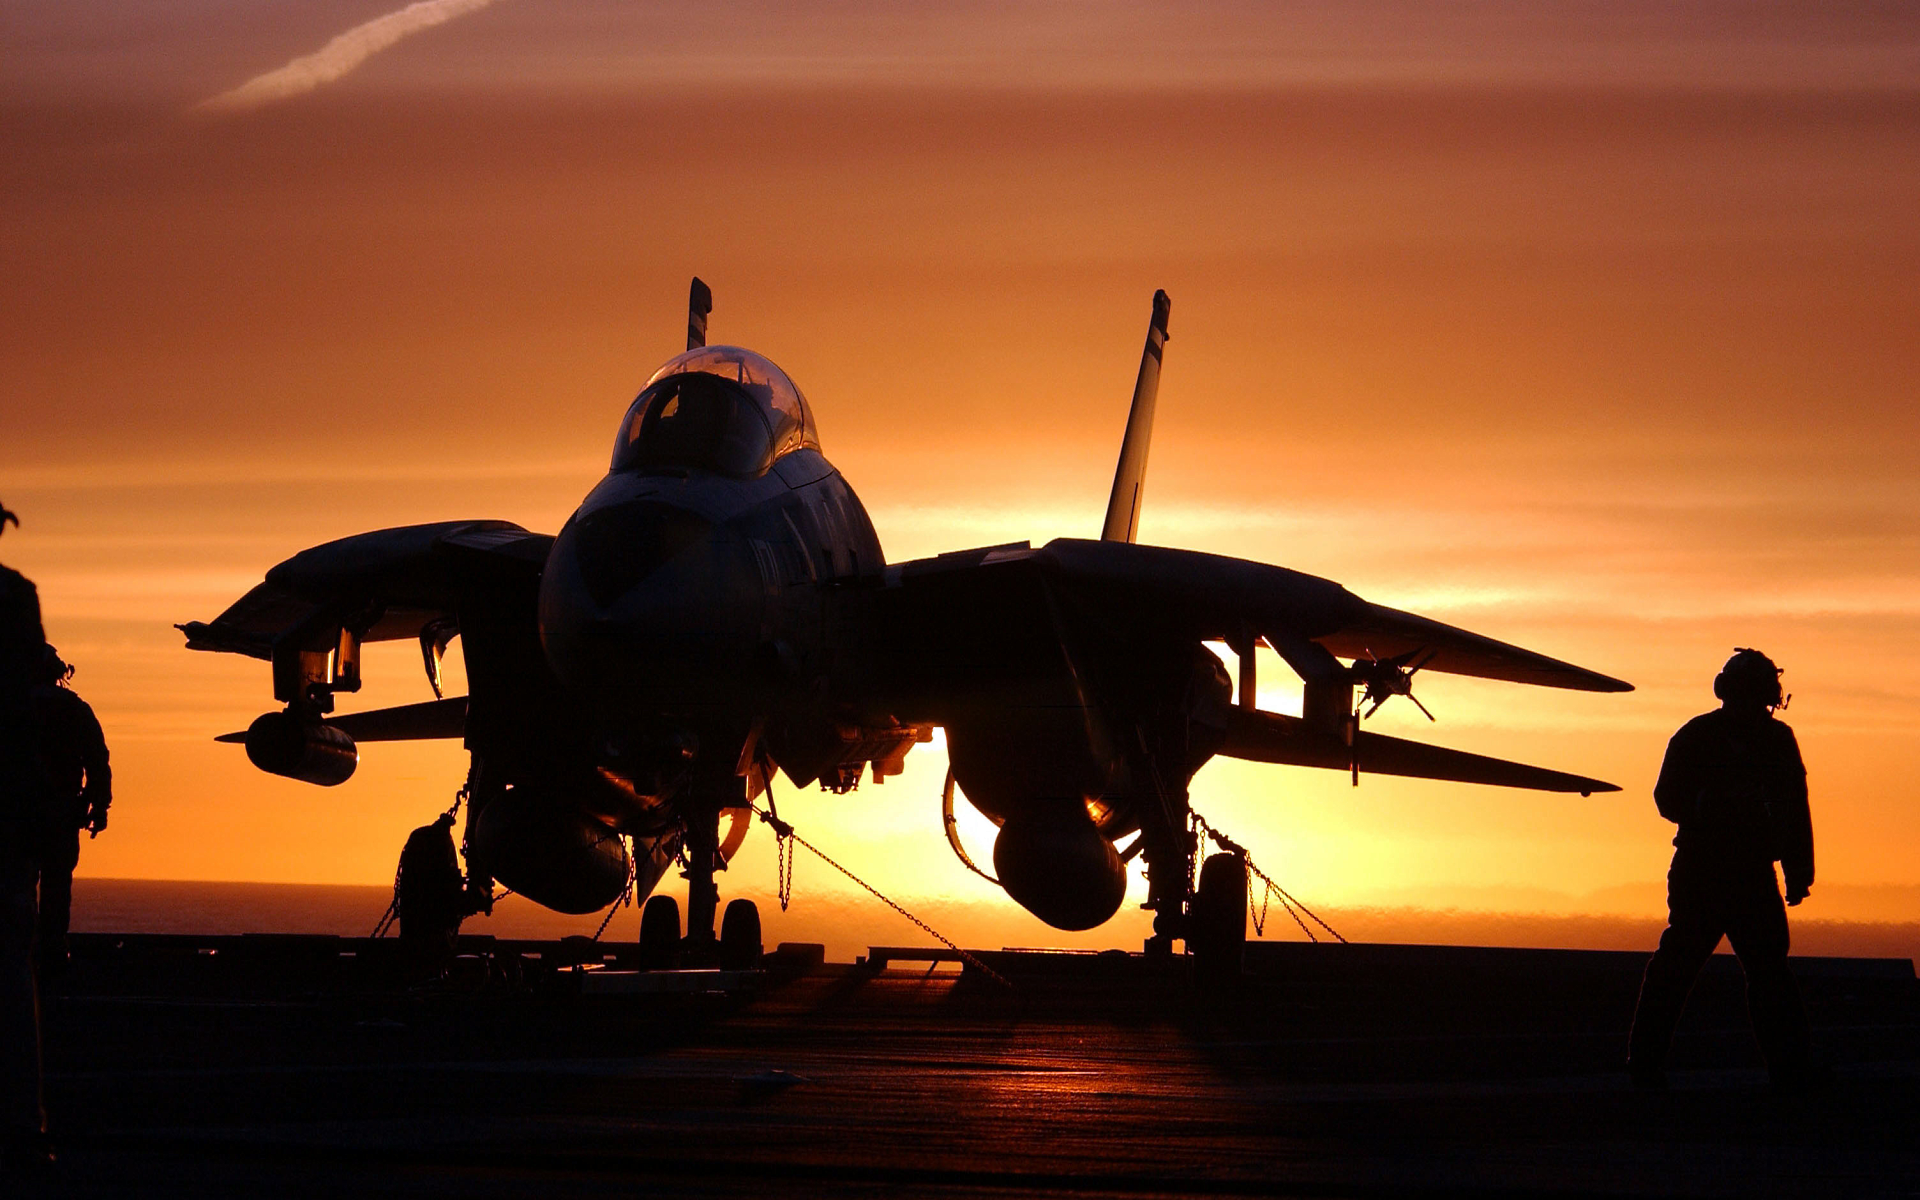 General 1920x1200 F-14 Tomcat sunset orange sky military military aircraft silhouette jet fighter vehicle military vehicle aircraft carrier United States Navy American aircraft